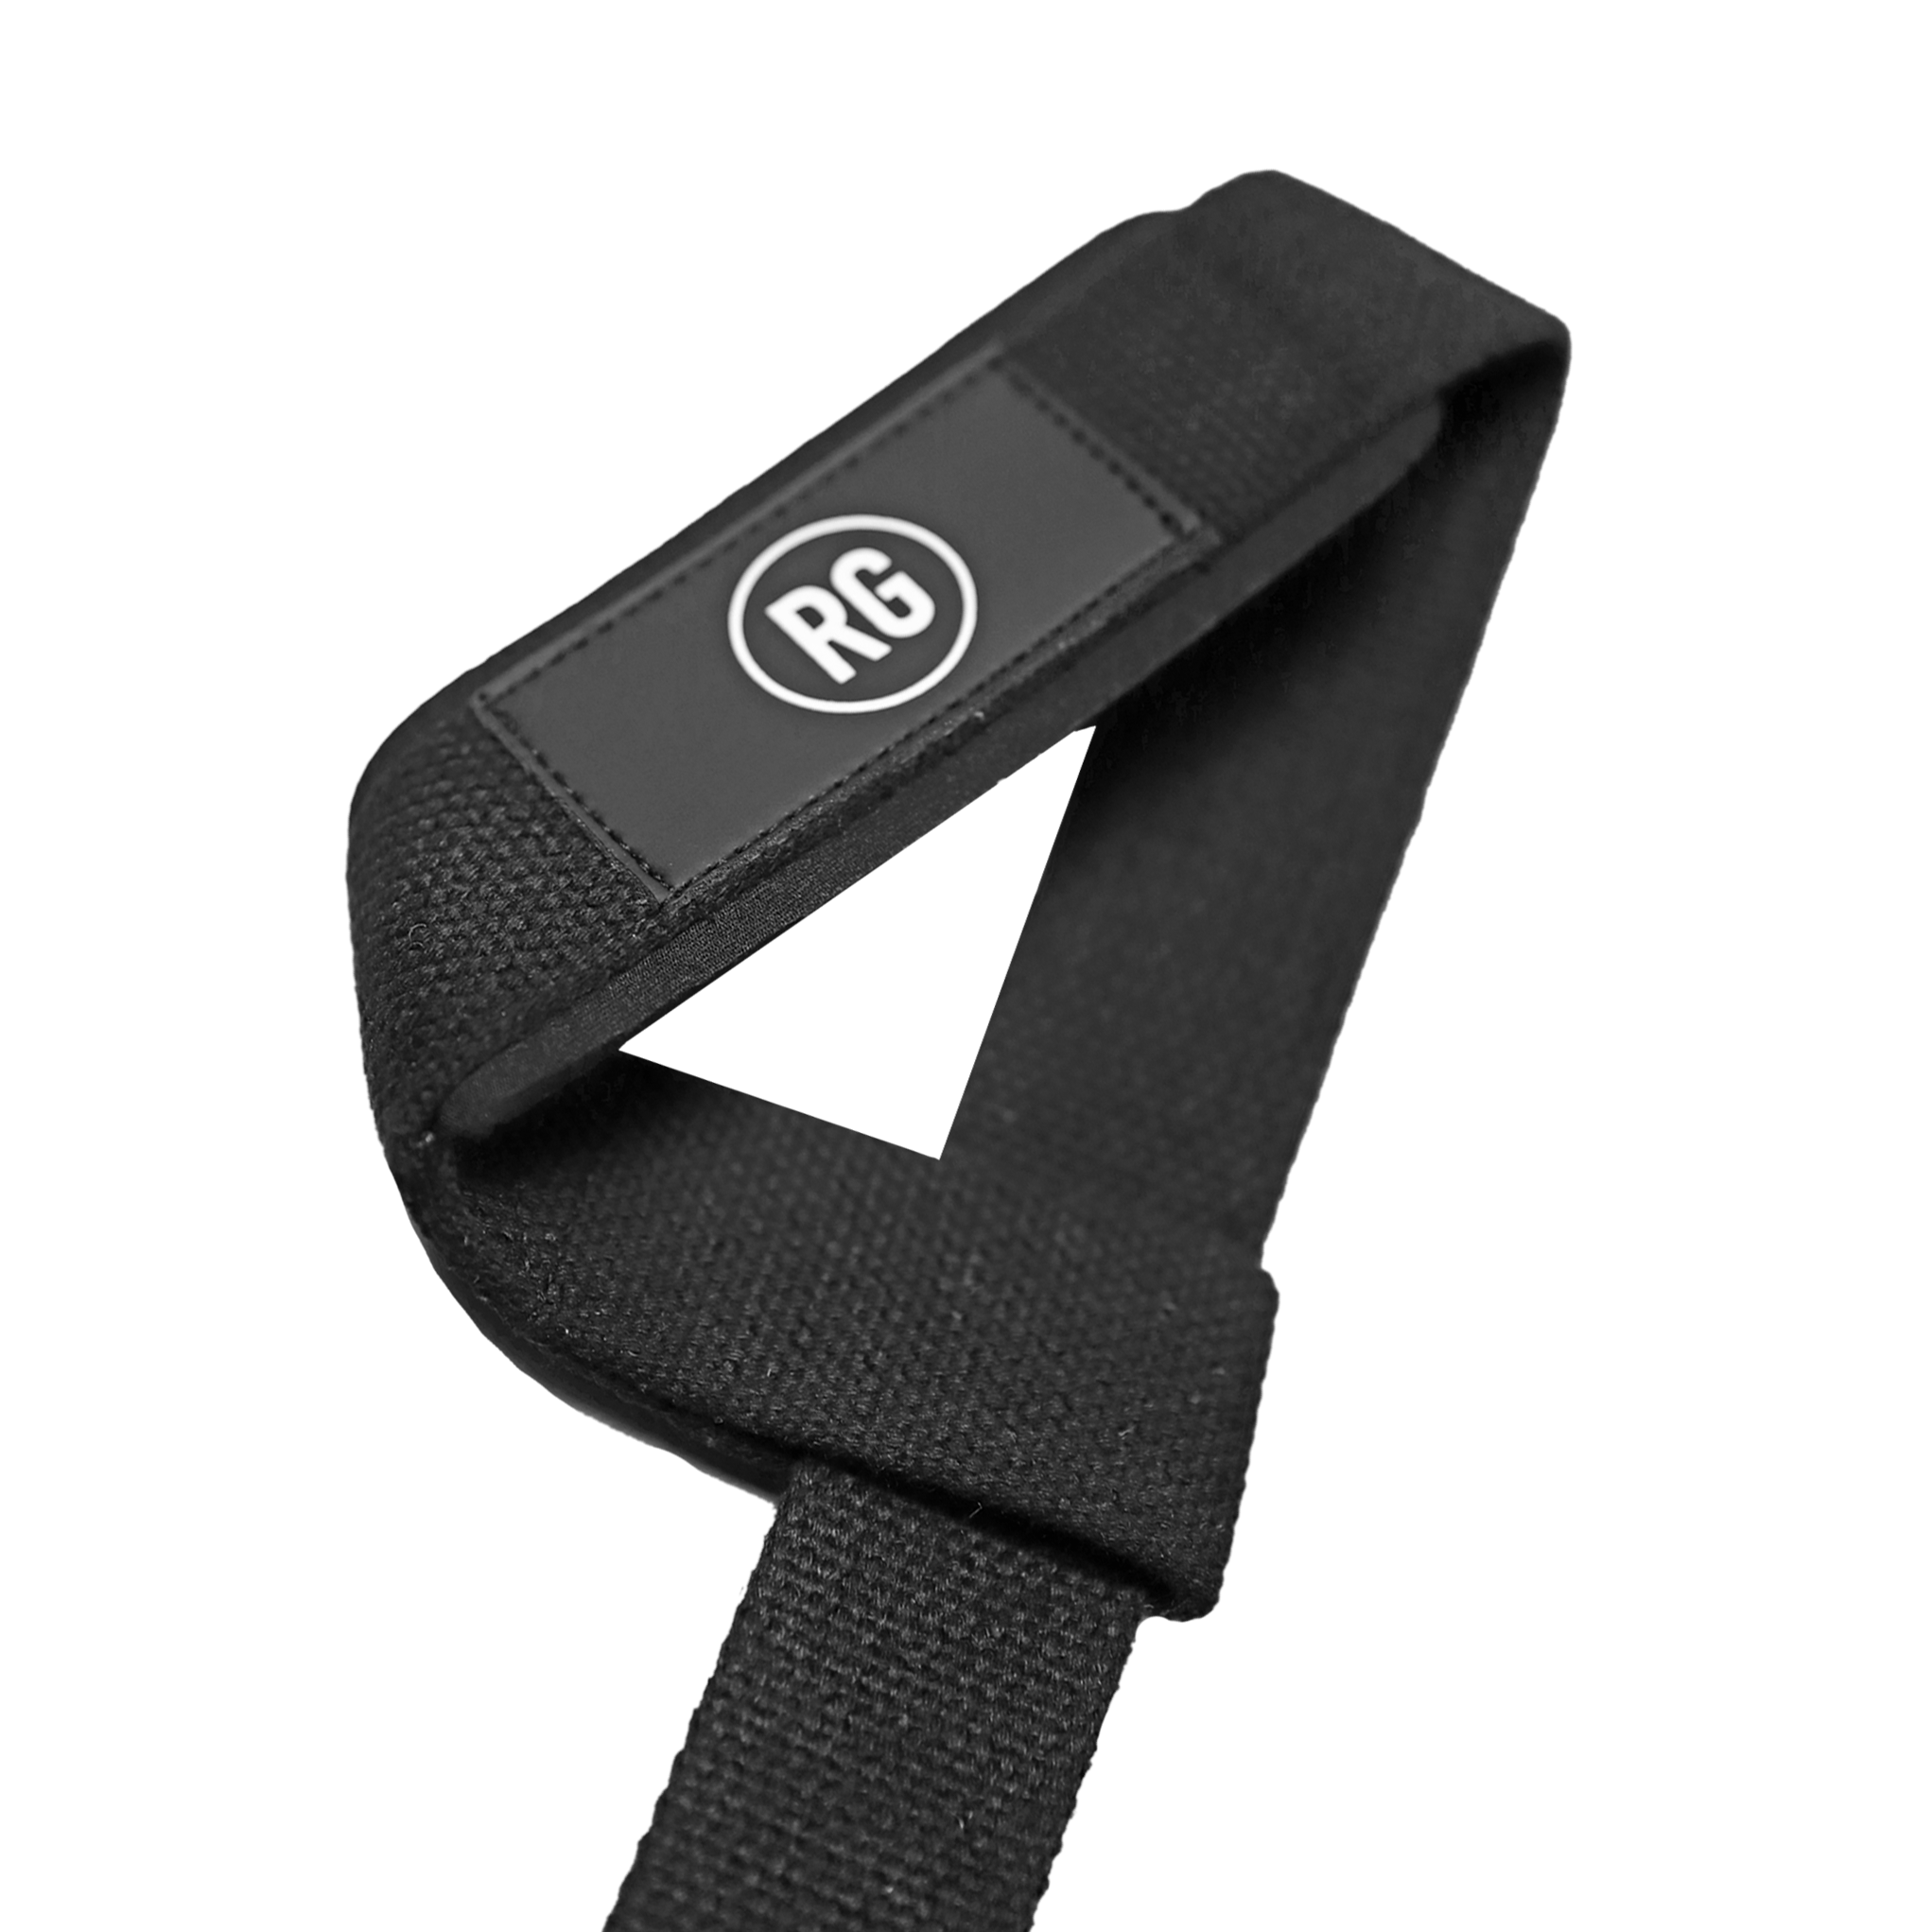 Roogrips Lifting Straps